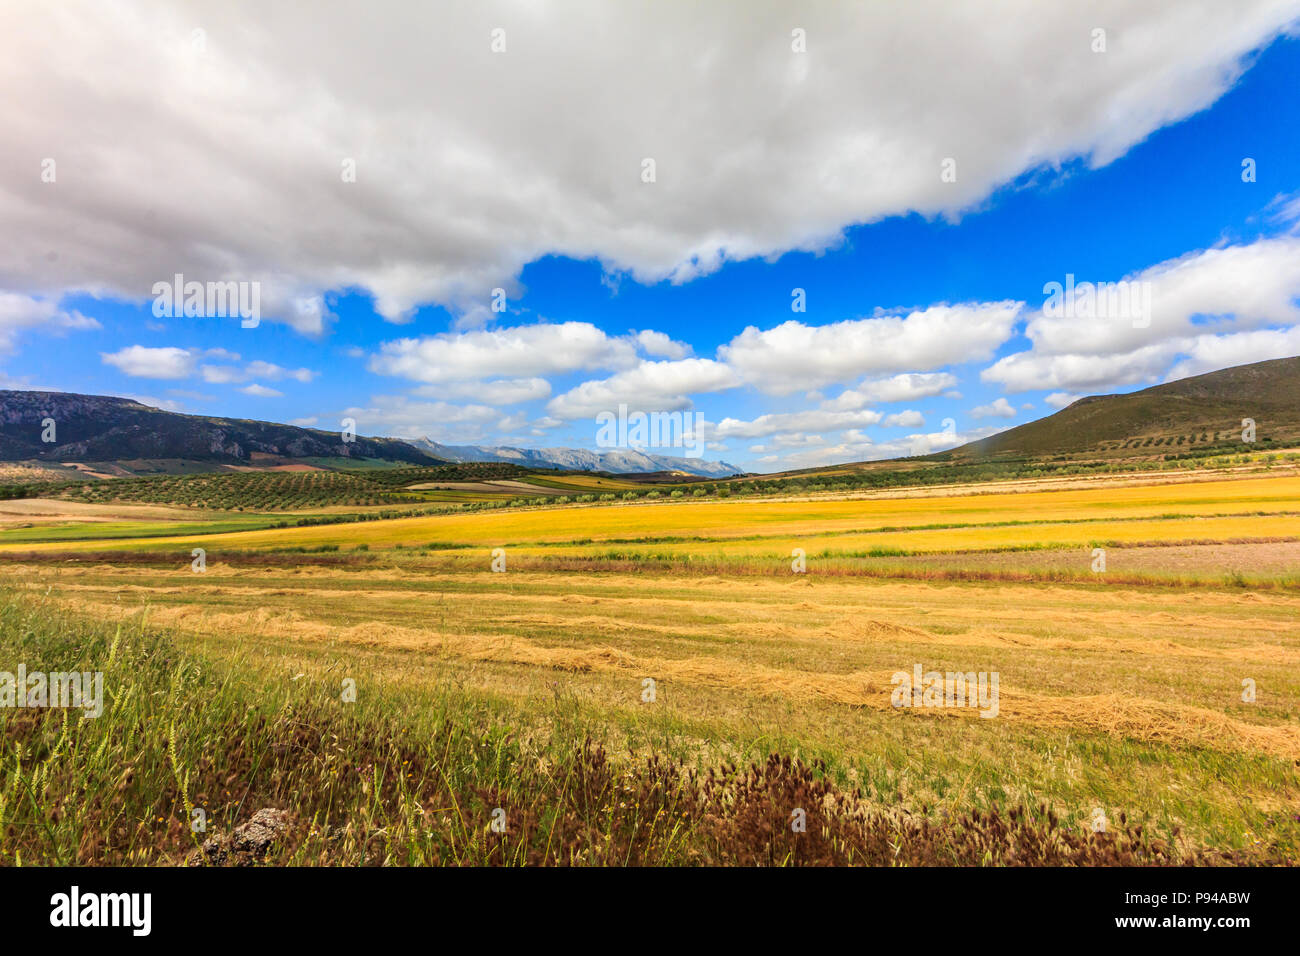 Landscape of golden fields and clouds, Granada Province, Spain Stock Photo